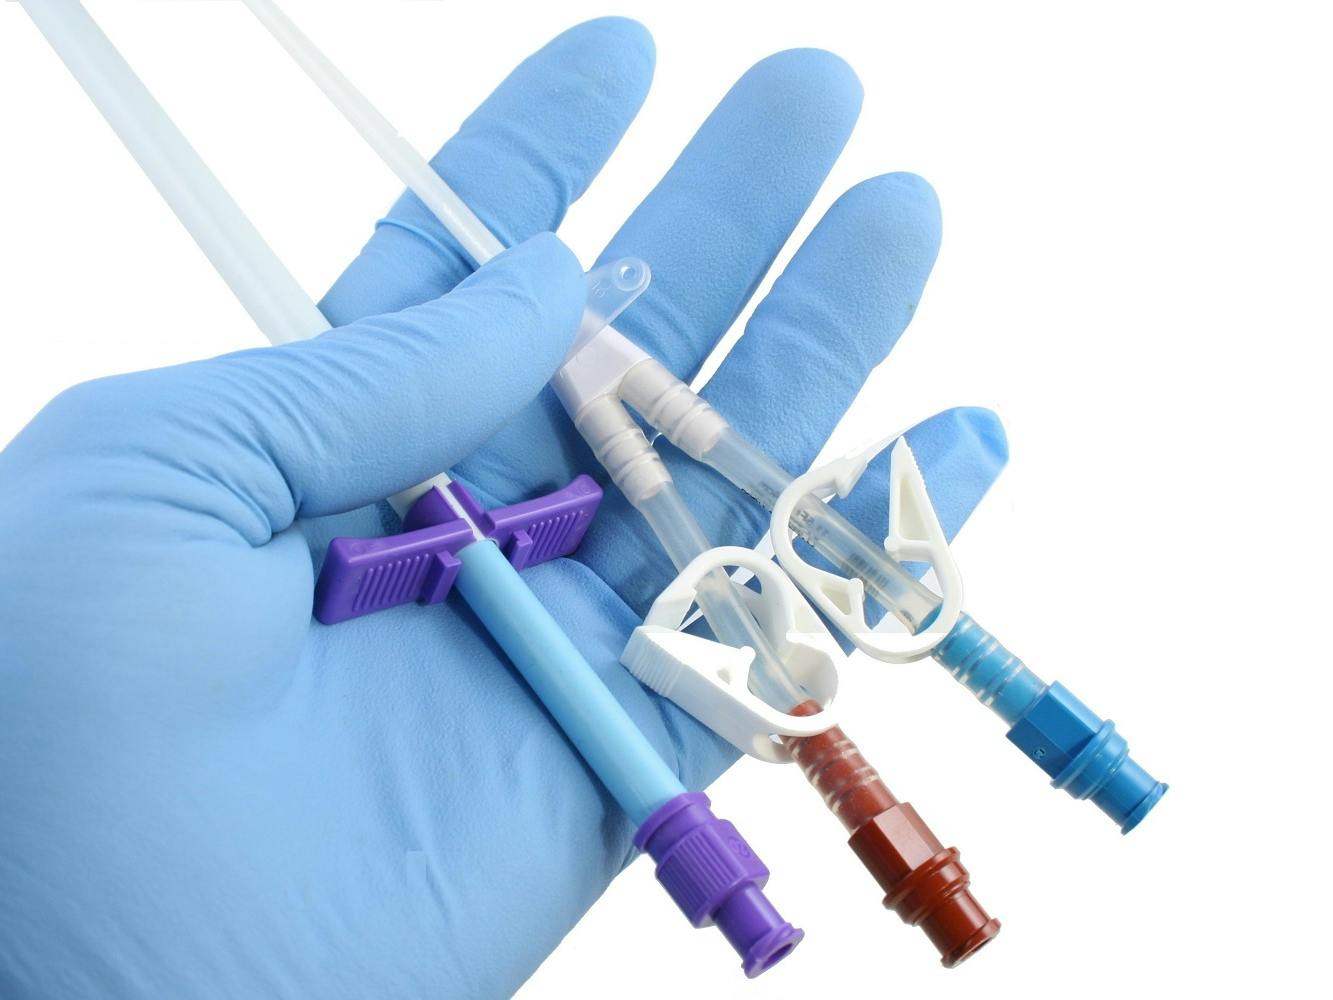 Does Medicare Cover Urinary Catheters?